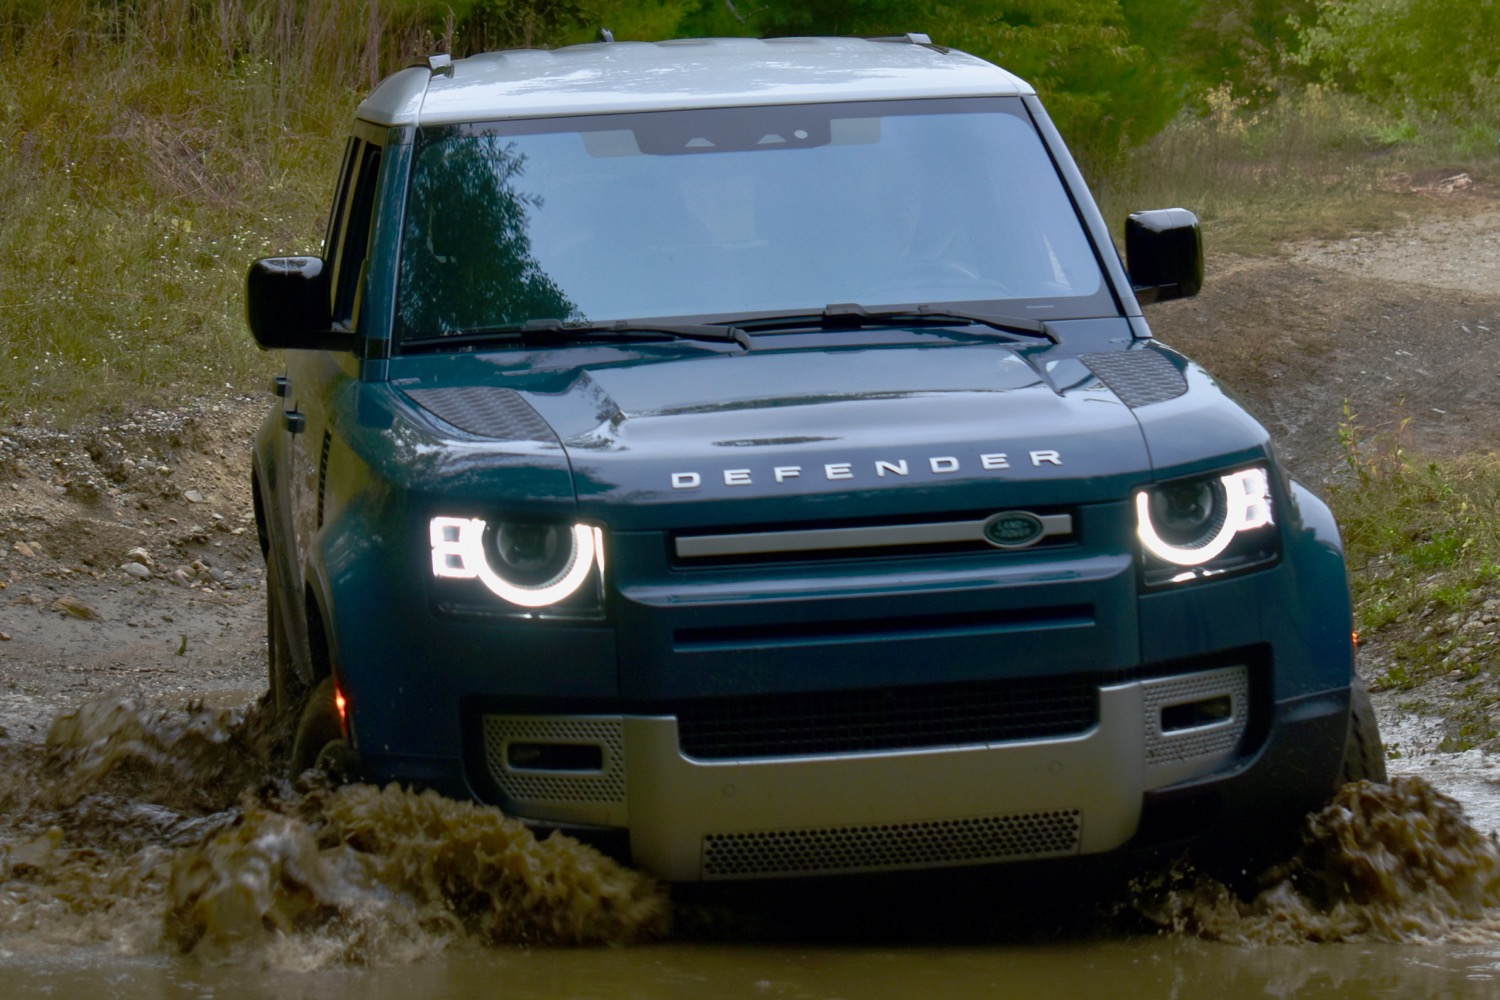 2020 Land Rover Defender 110 First Drive Review | Digital Trends